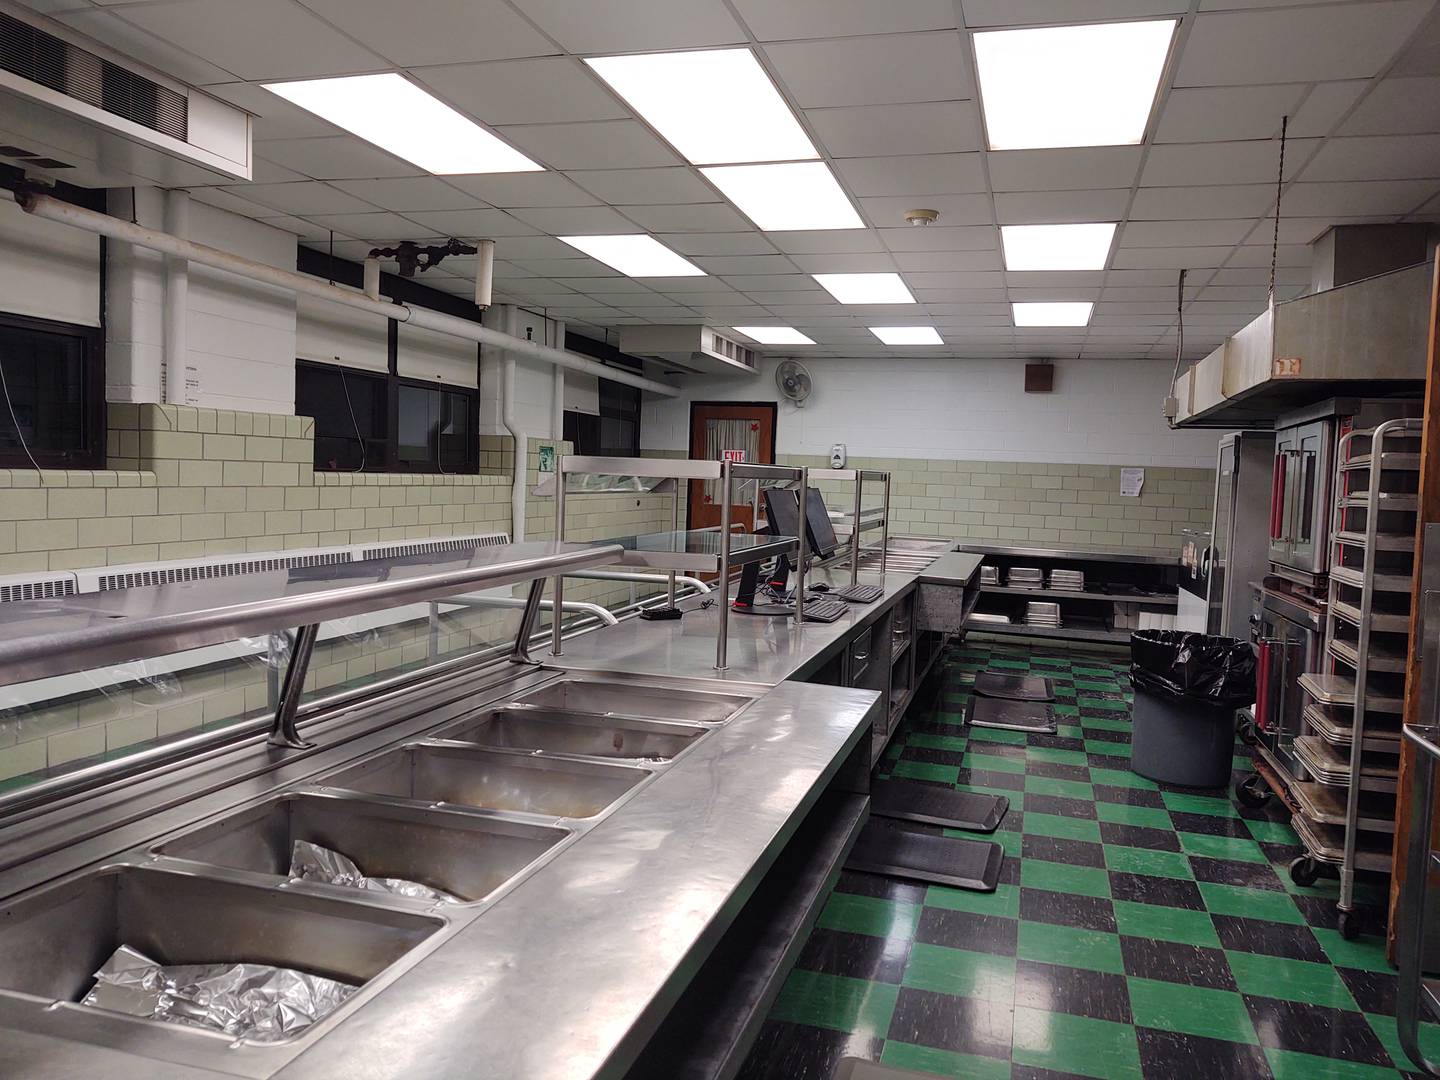 The service area outside the main kitchen at Rock Falls High School. The board of education approved a $1.5 million project to renovate both the kitchen and service area.